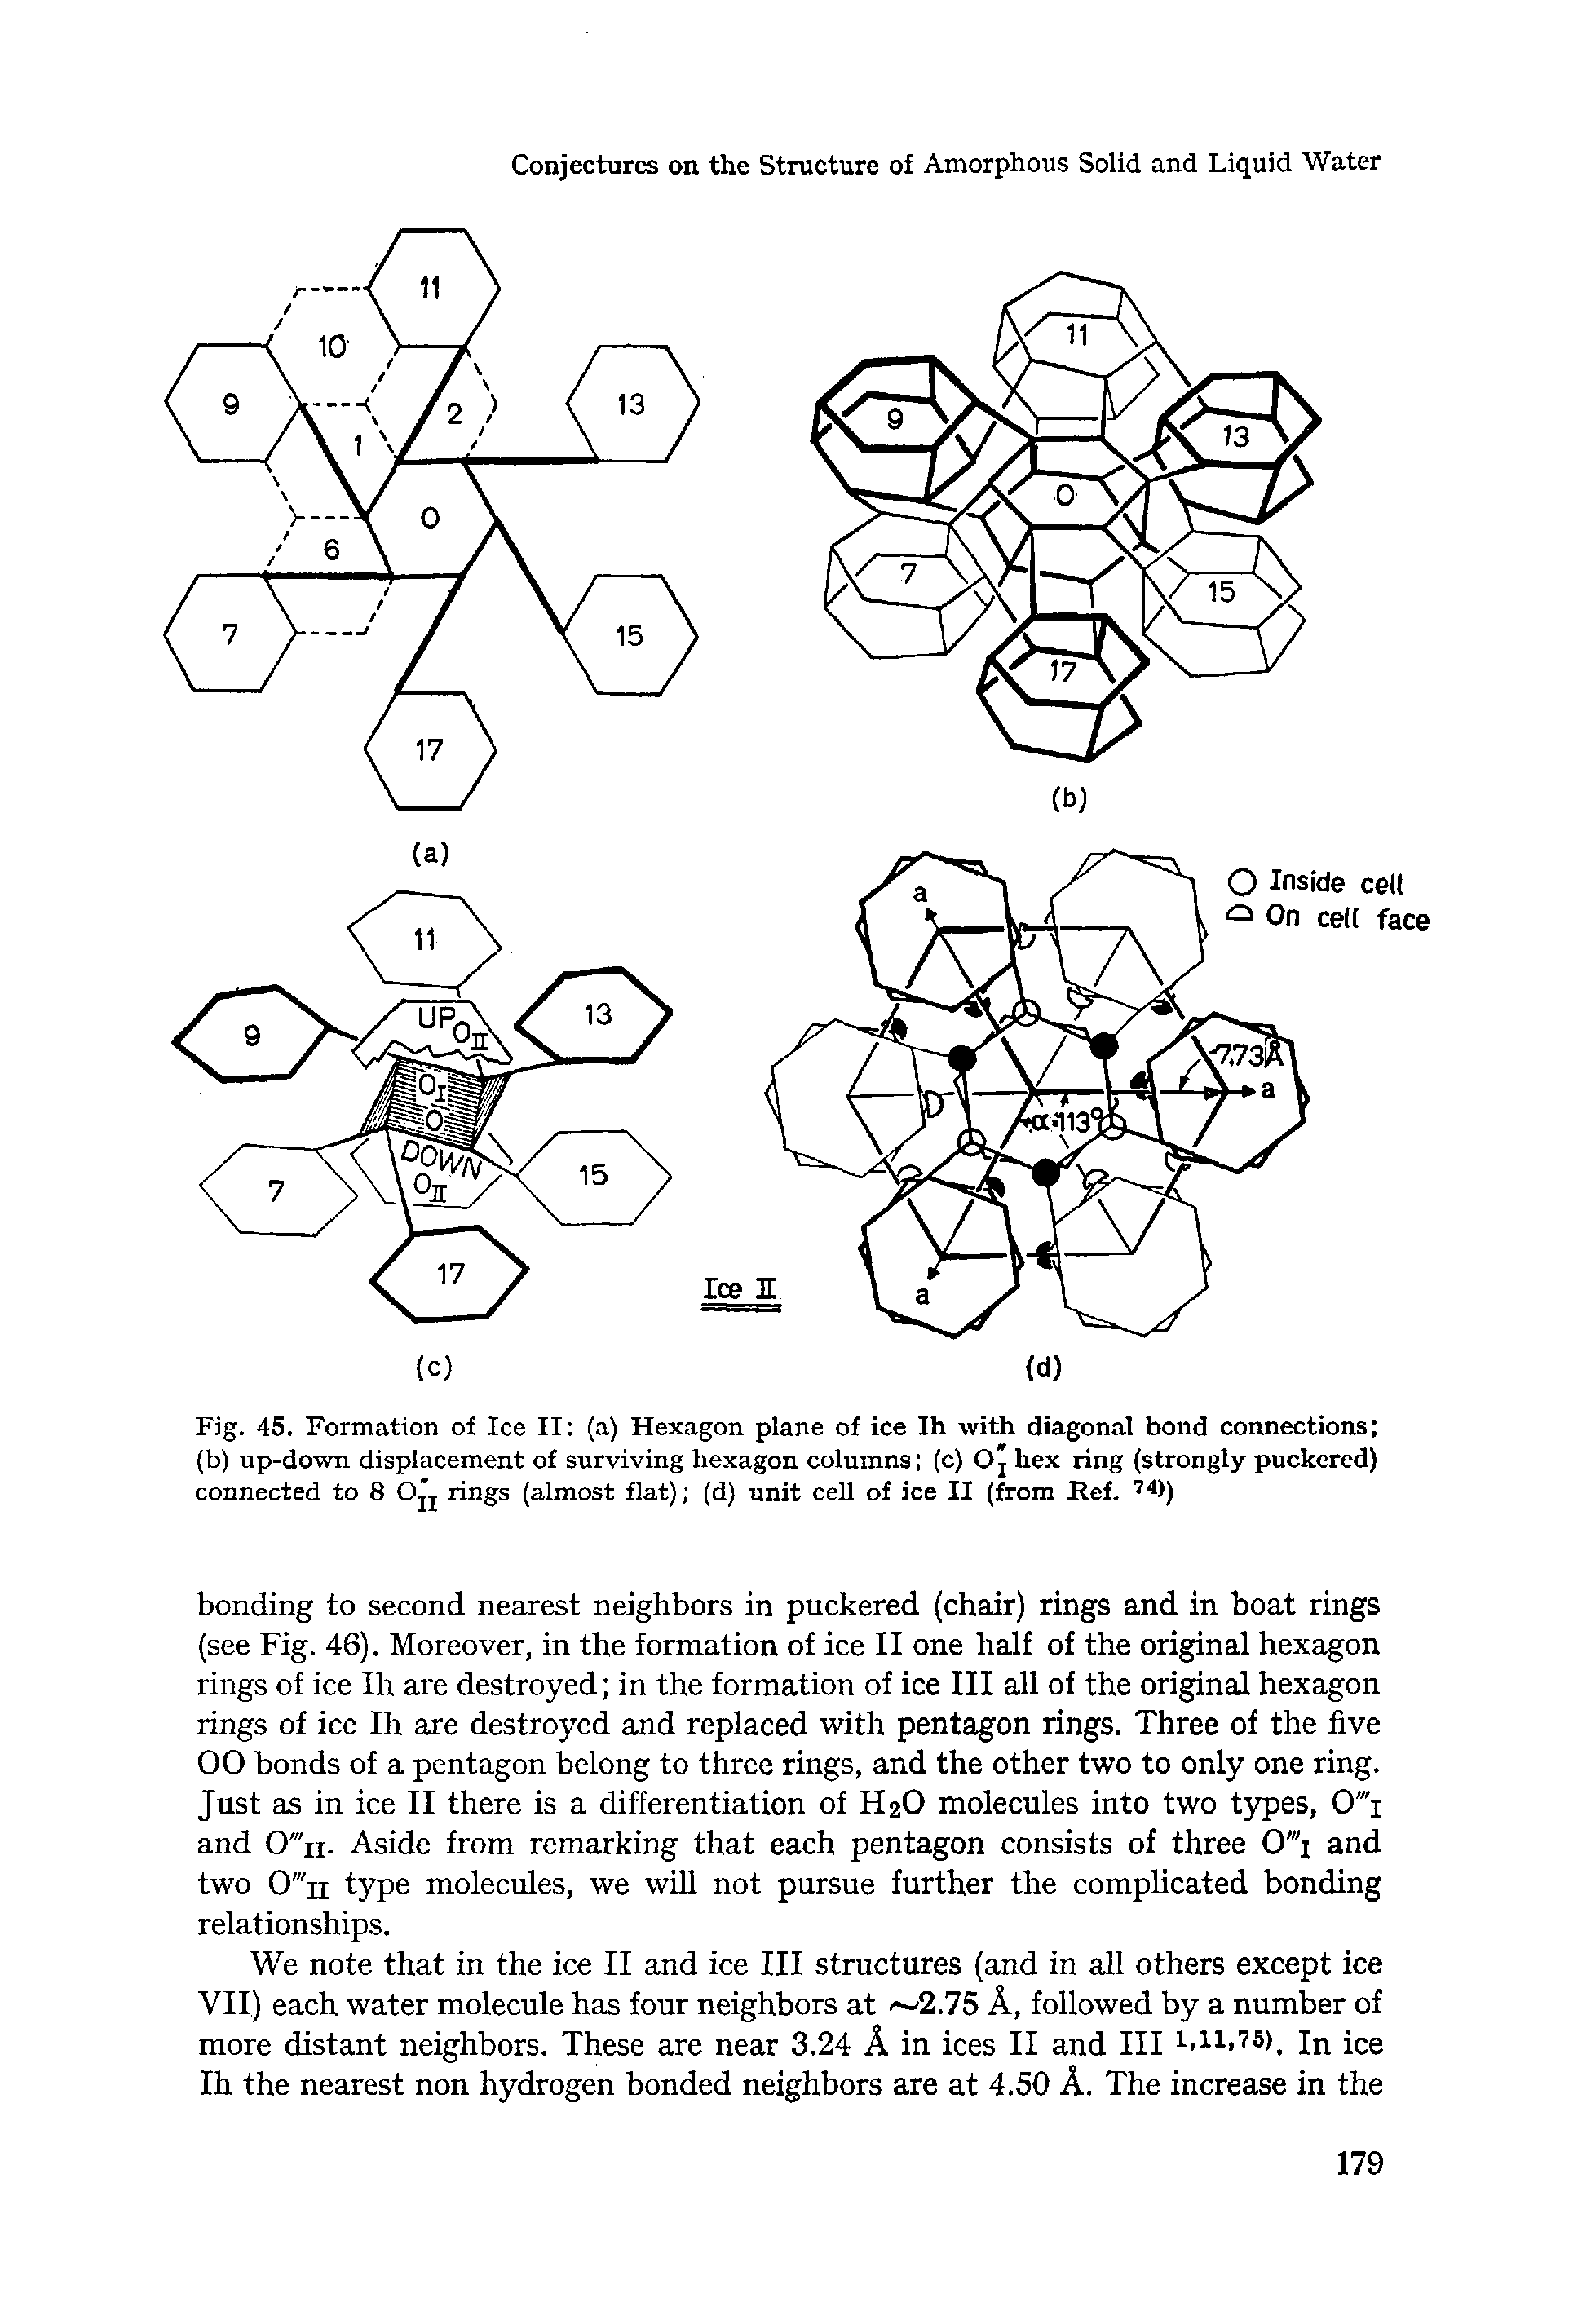 Fig. 45. Formation of Ice II (a) Hexagon plane of ice Ih with diagonal bond connections (b) up-down displacement of surviving hexagon columns (c) O j hex ring (strongly puckered) connected to 8 O j rings (almost flat) (d) unit cell of ice II (from Ref. 74>)...